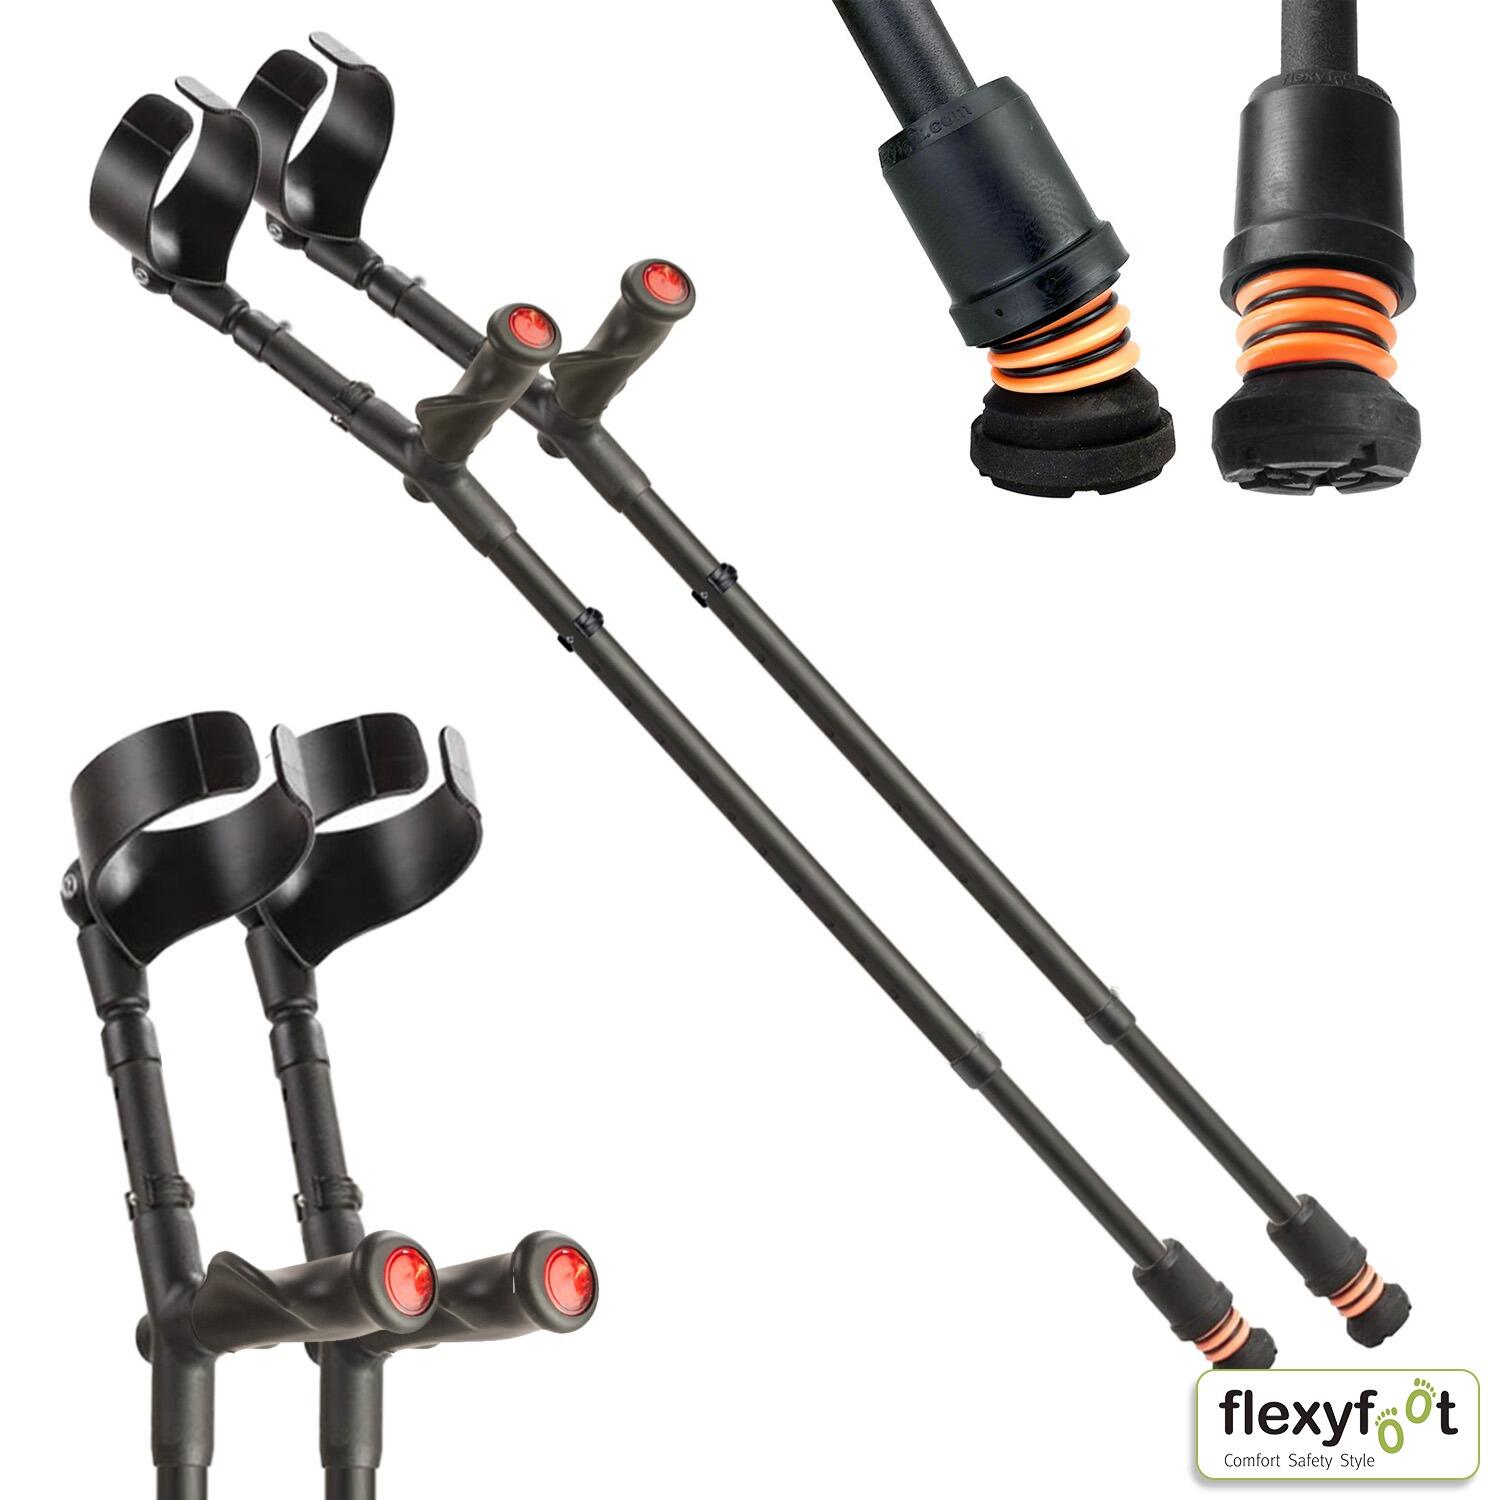 A pair of Textured black Flexyfoot Comfort Grip Double Adjustable Crutches